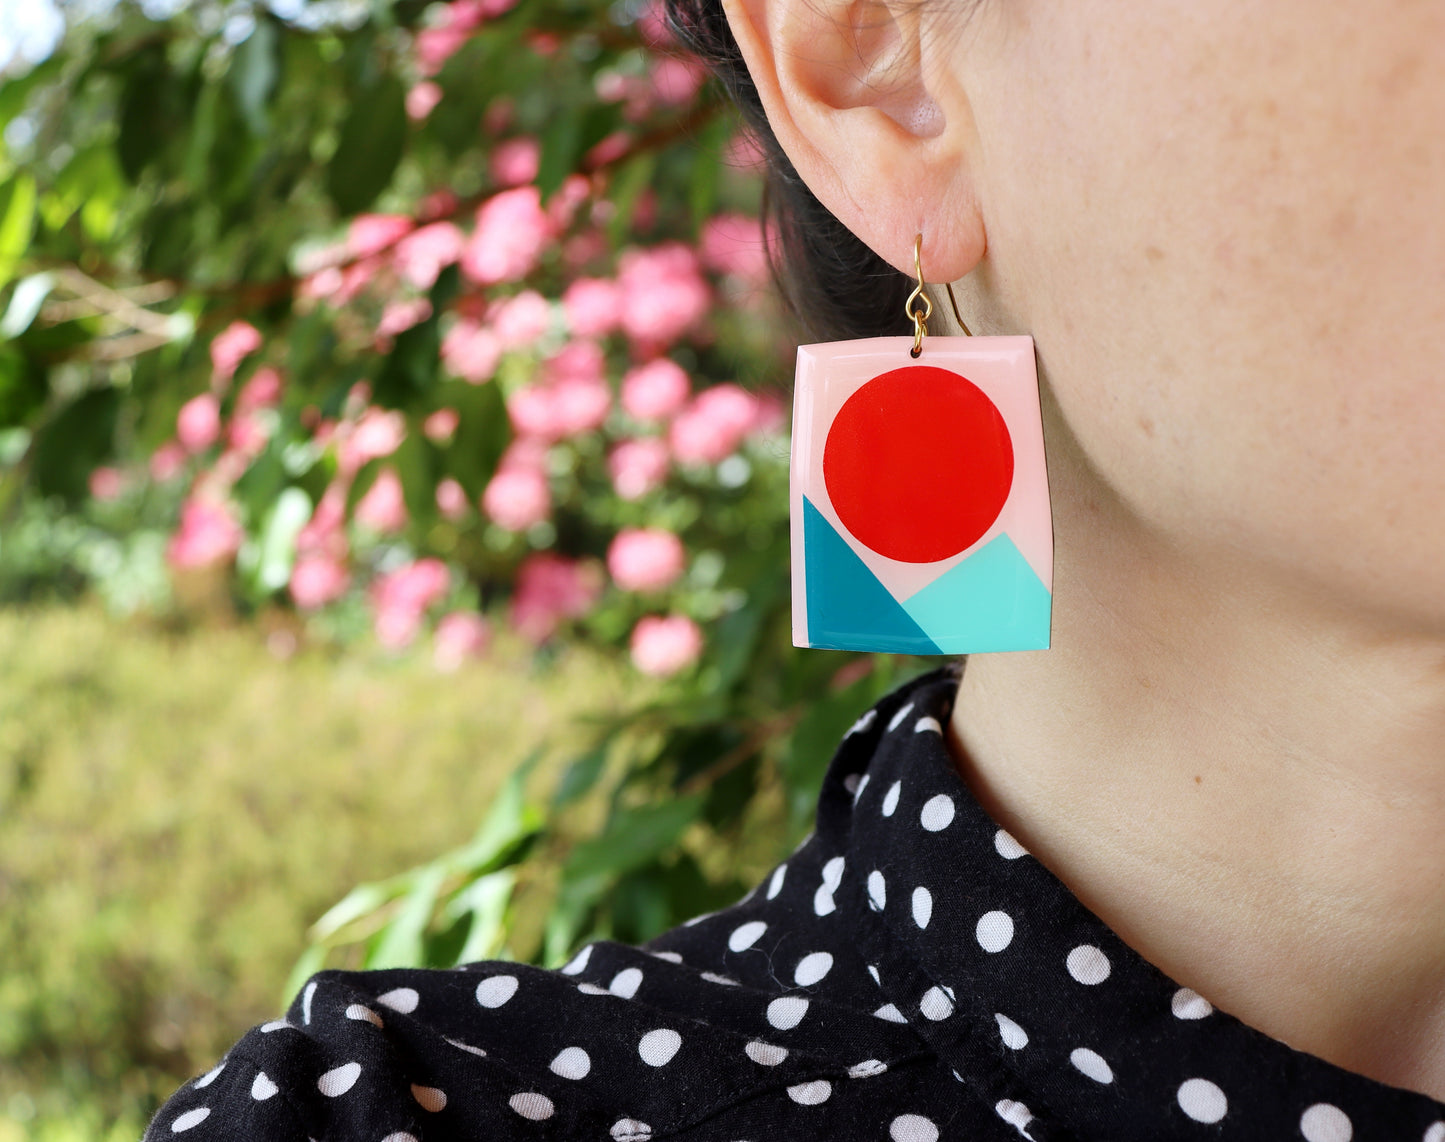 20% OFF 2 PAIRS LEFT / IRIS Contemporary statement earrings in red, teal and turquoise / upcycled vinyl record